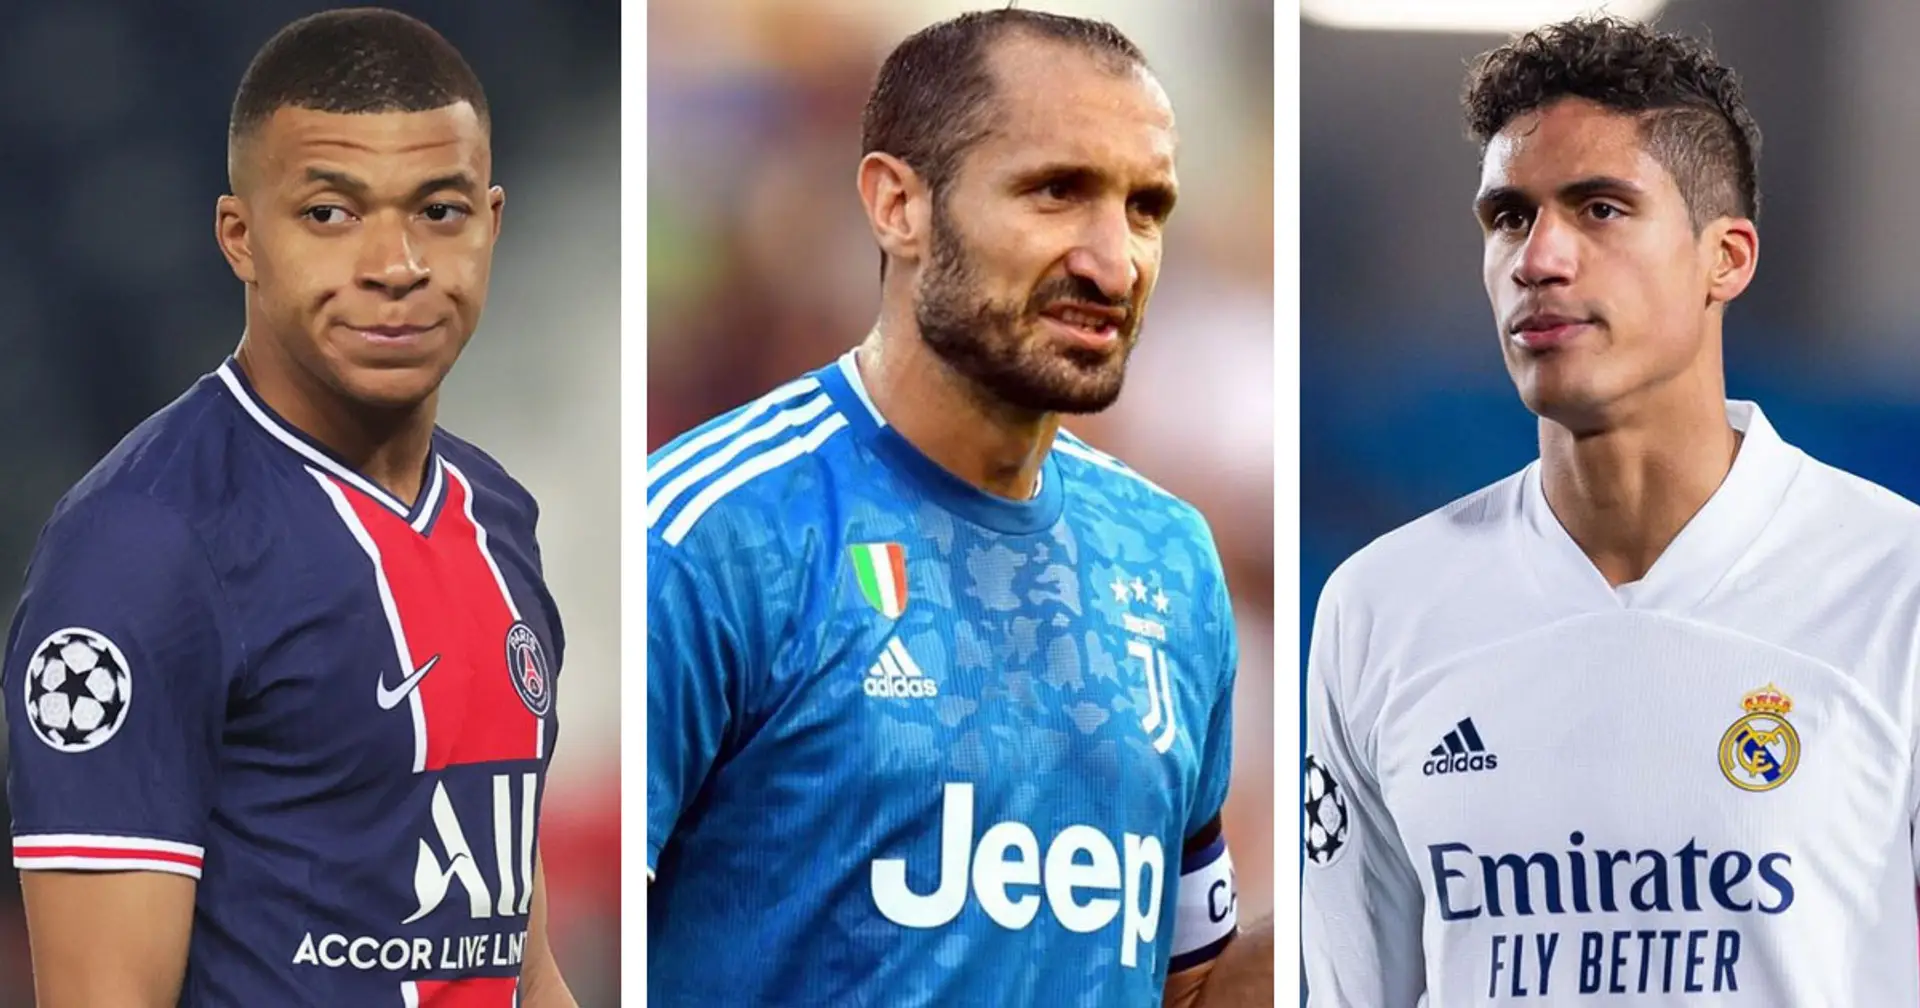 3 players to join, 3 to leave: Madrid's INs and OUTs sorted from most unlikely to likely